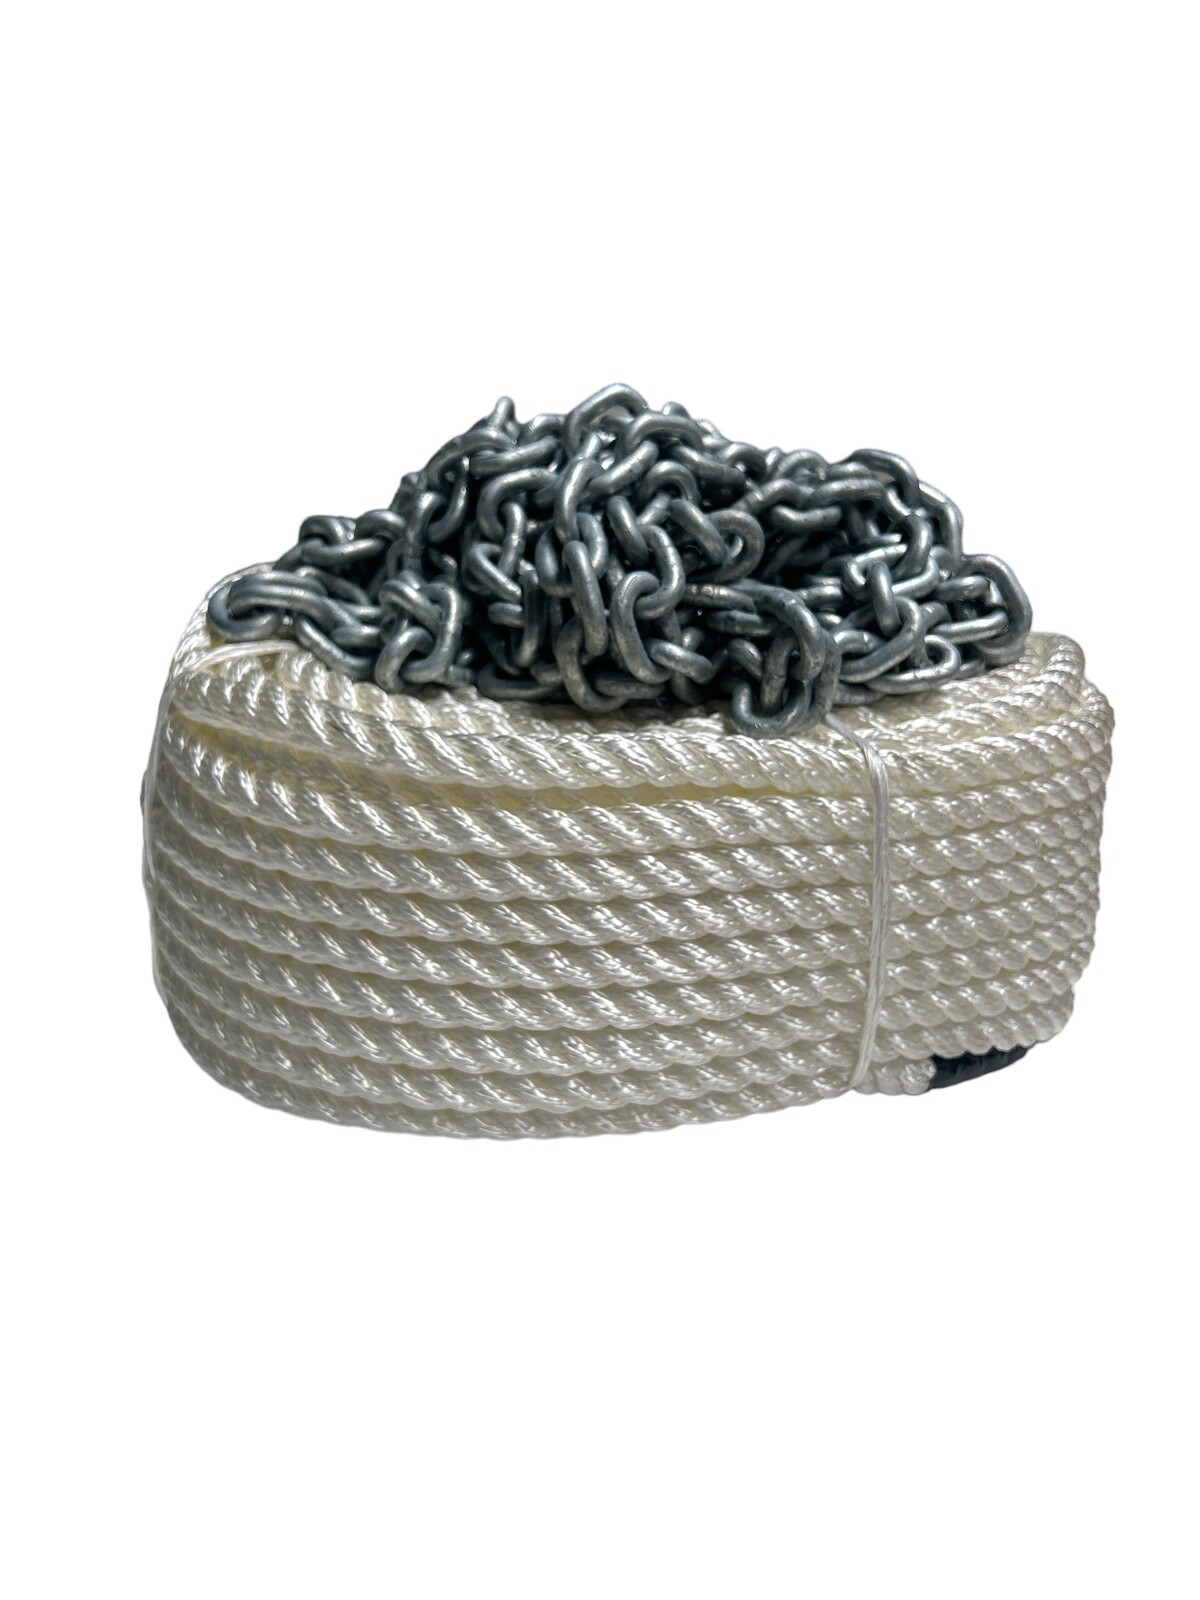 Anchor Rope and Chain Kit - 50m x 12mm Nylon Rope/10m x 6mm